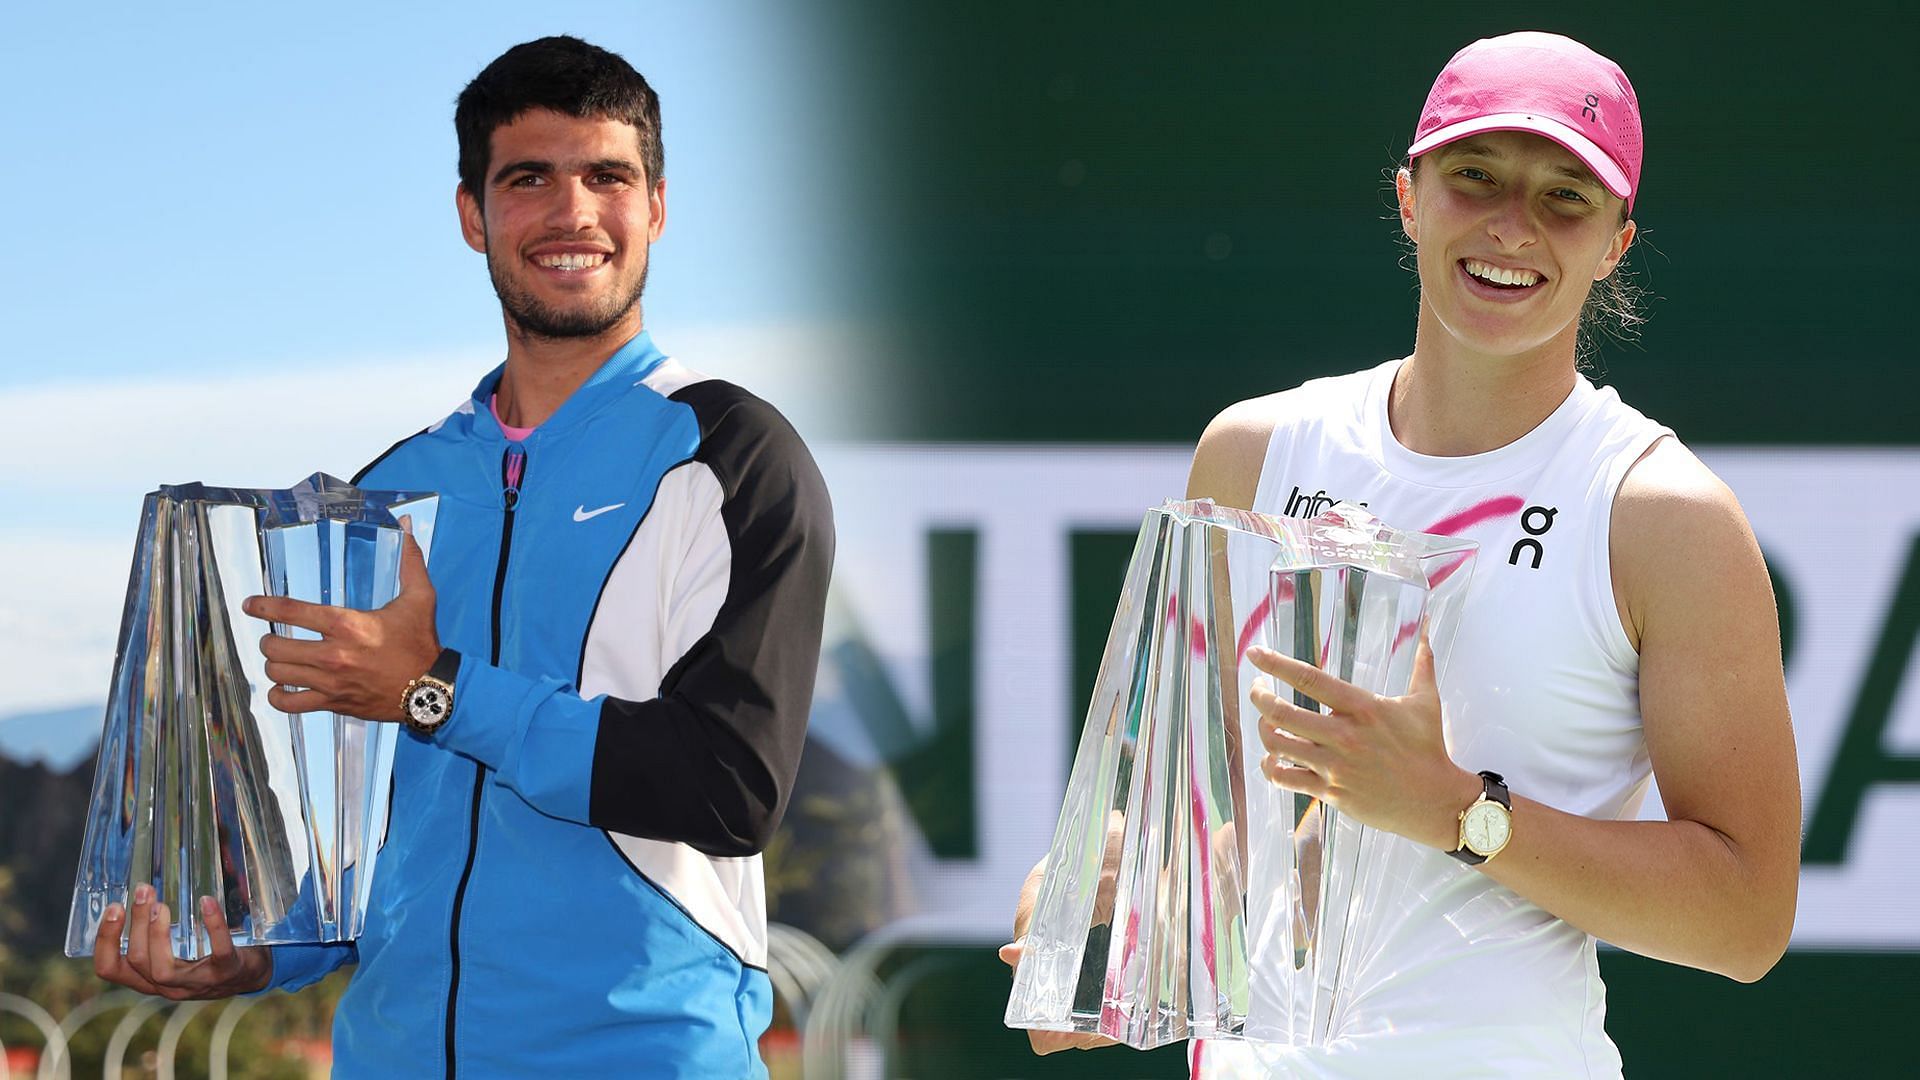 Alcaraz and Swiatek have both won the Indian Wells title recently